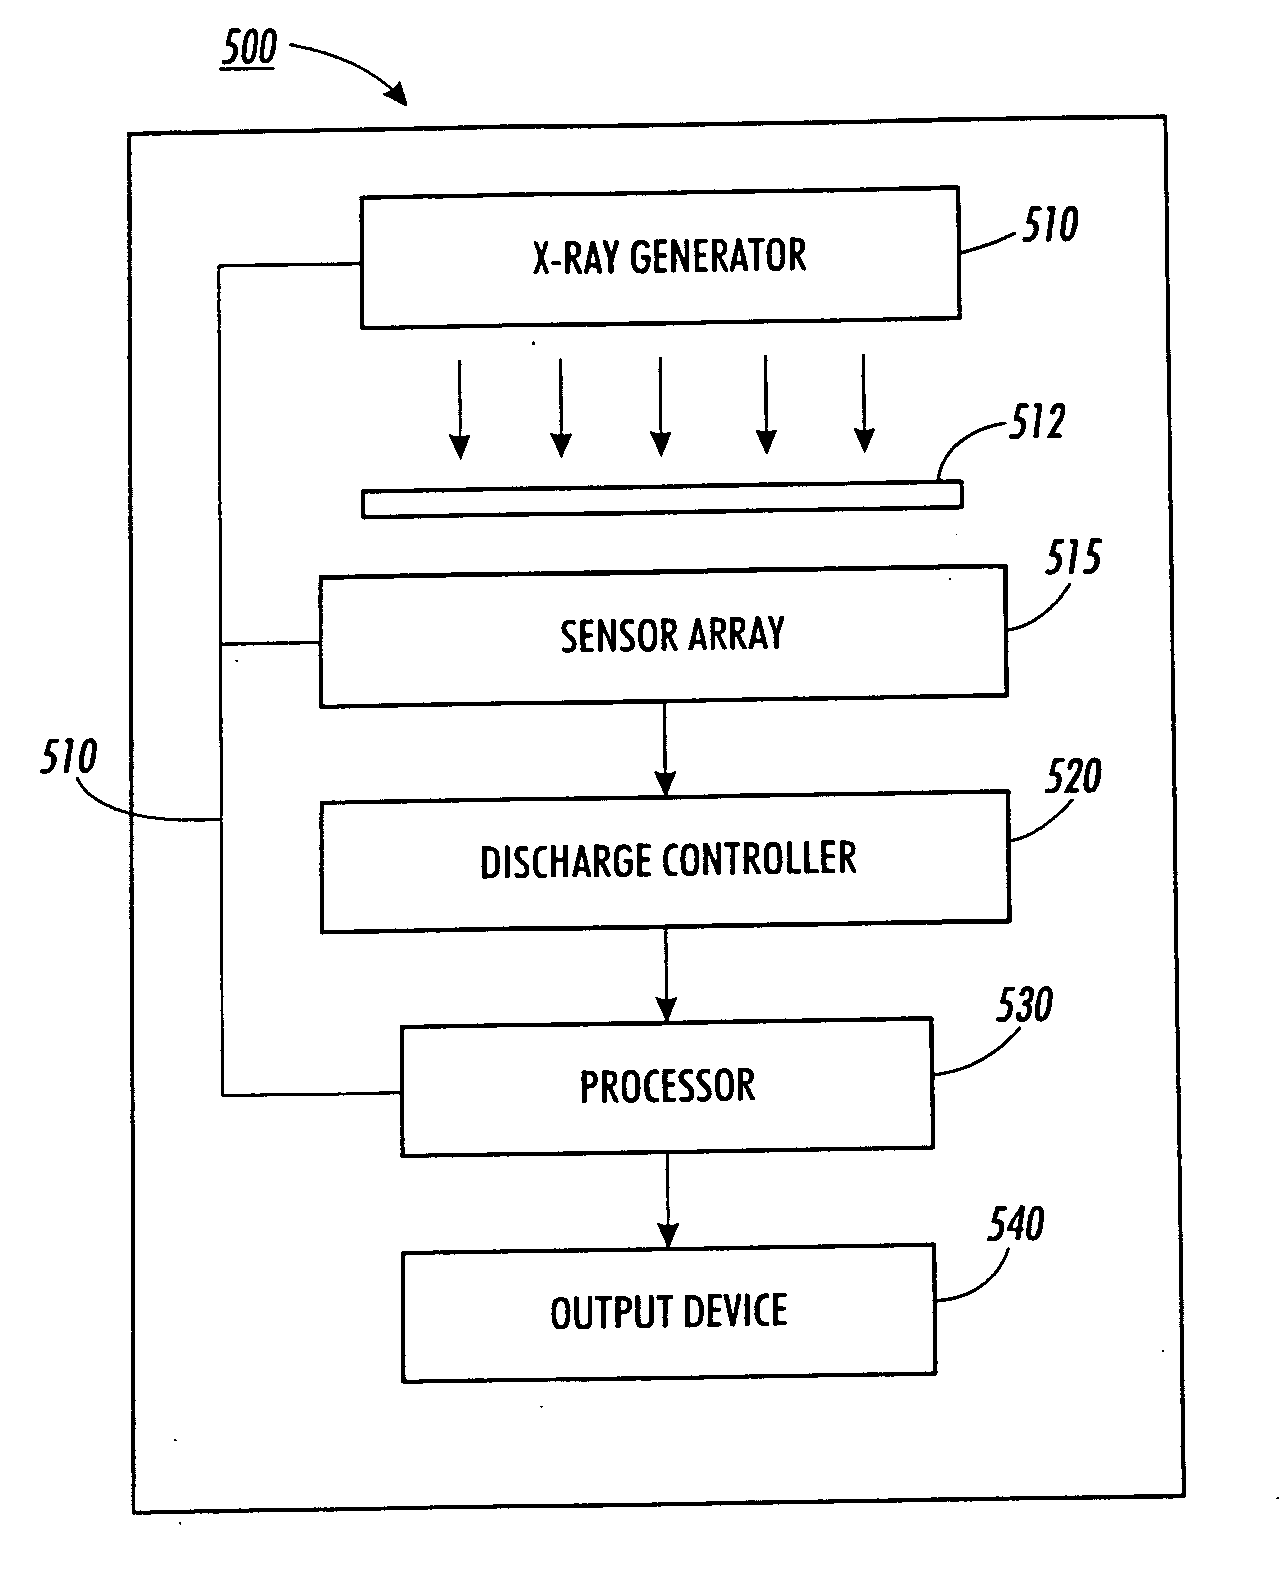 Imaging system and method that removes an electrical charge from a sensor